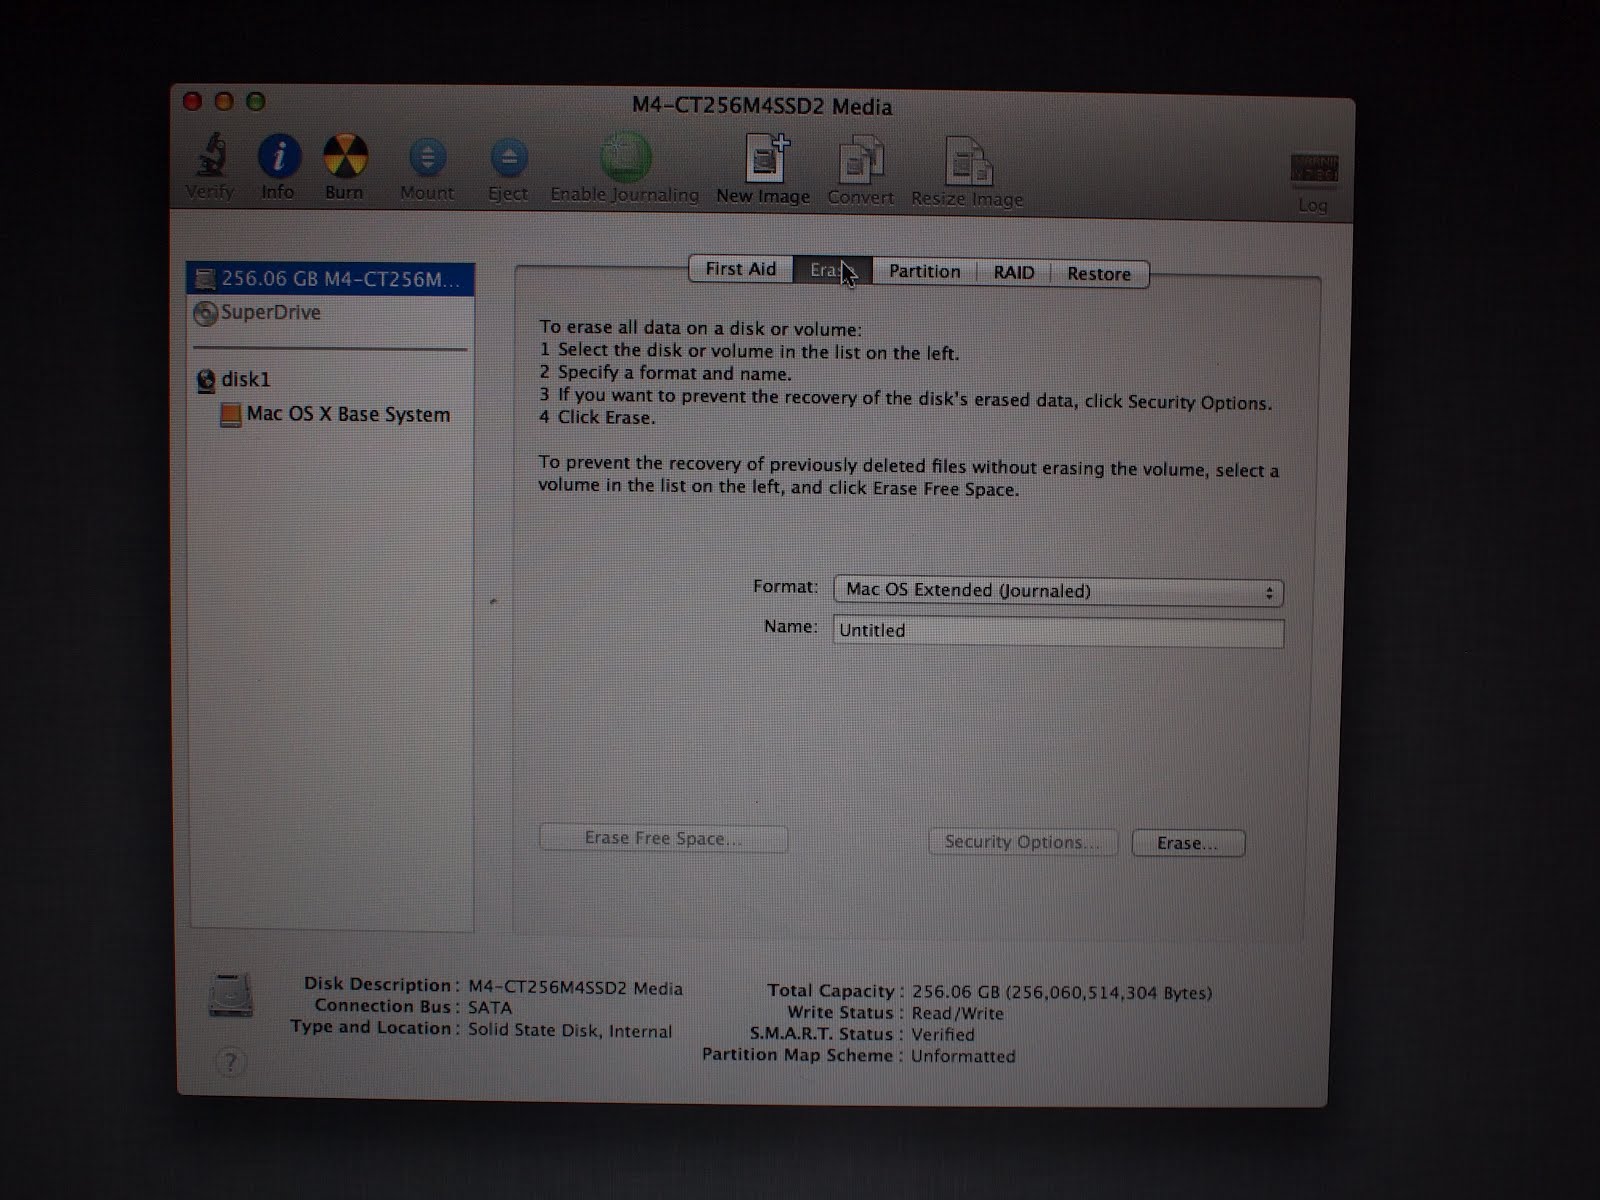 The new hard-drive just needs formatting with HFS+